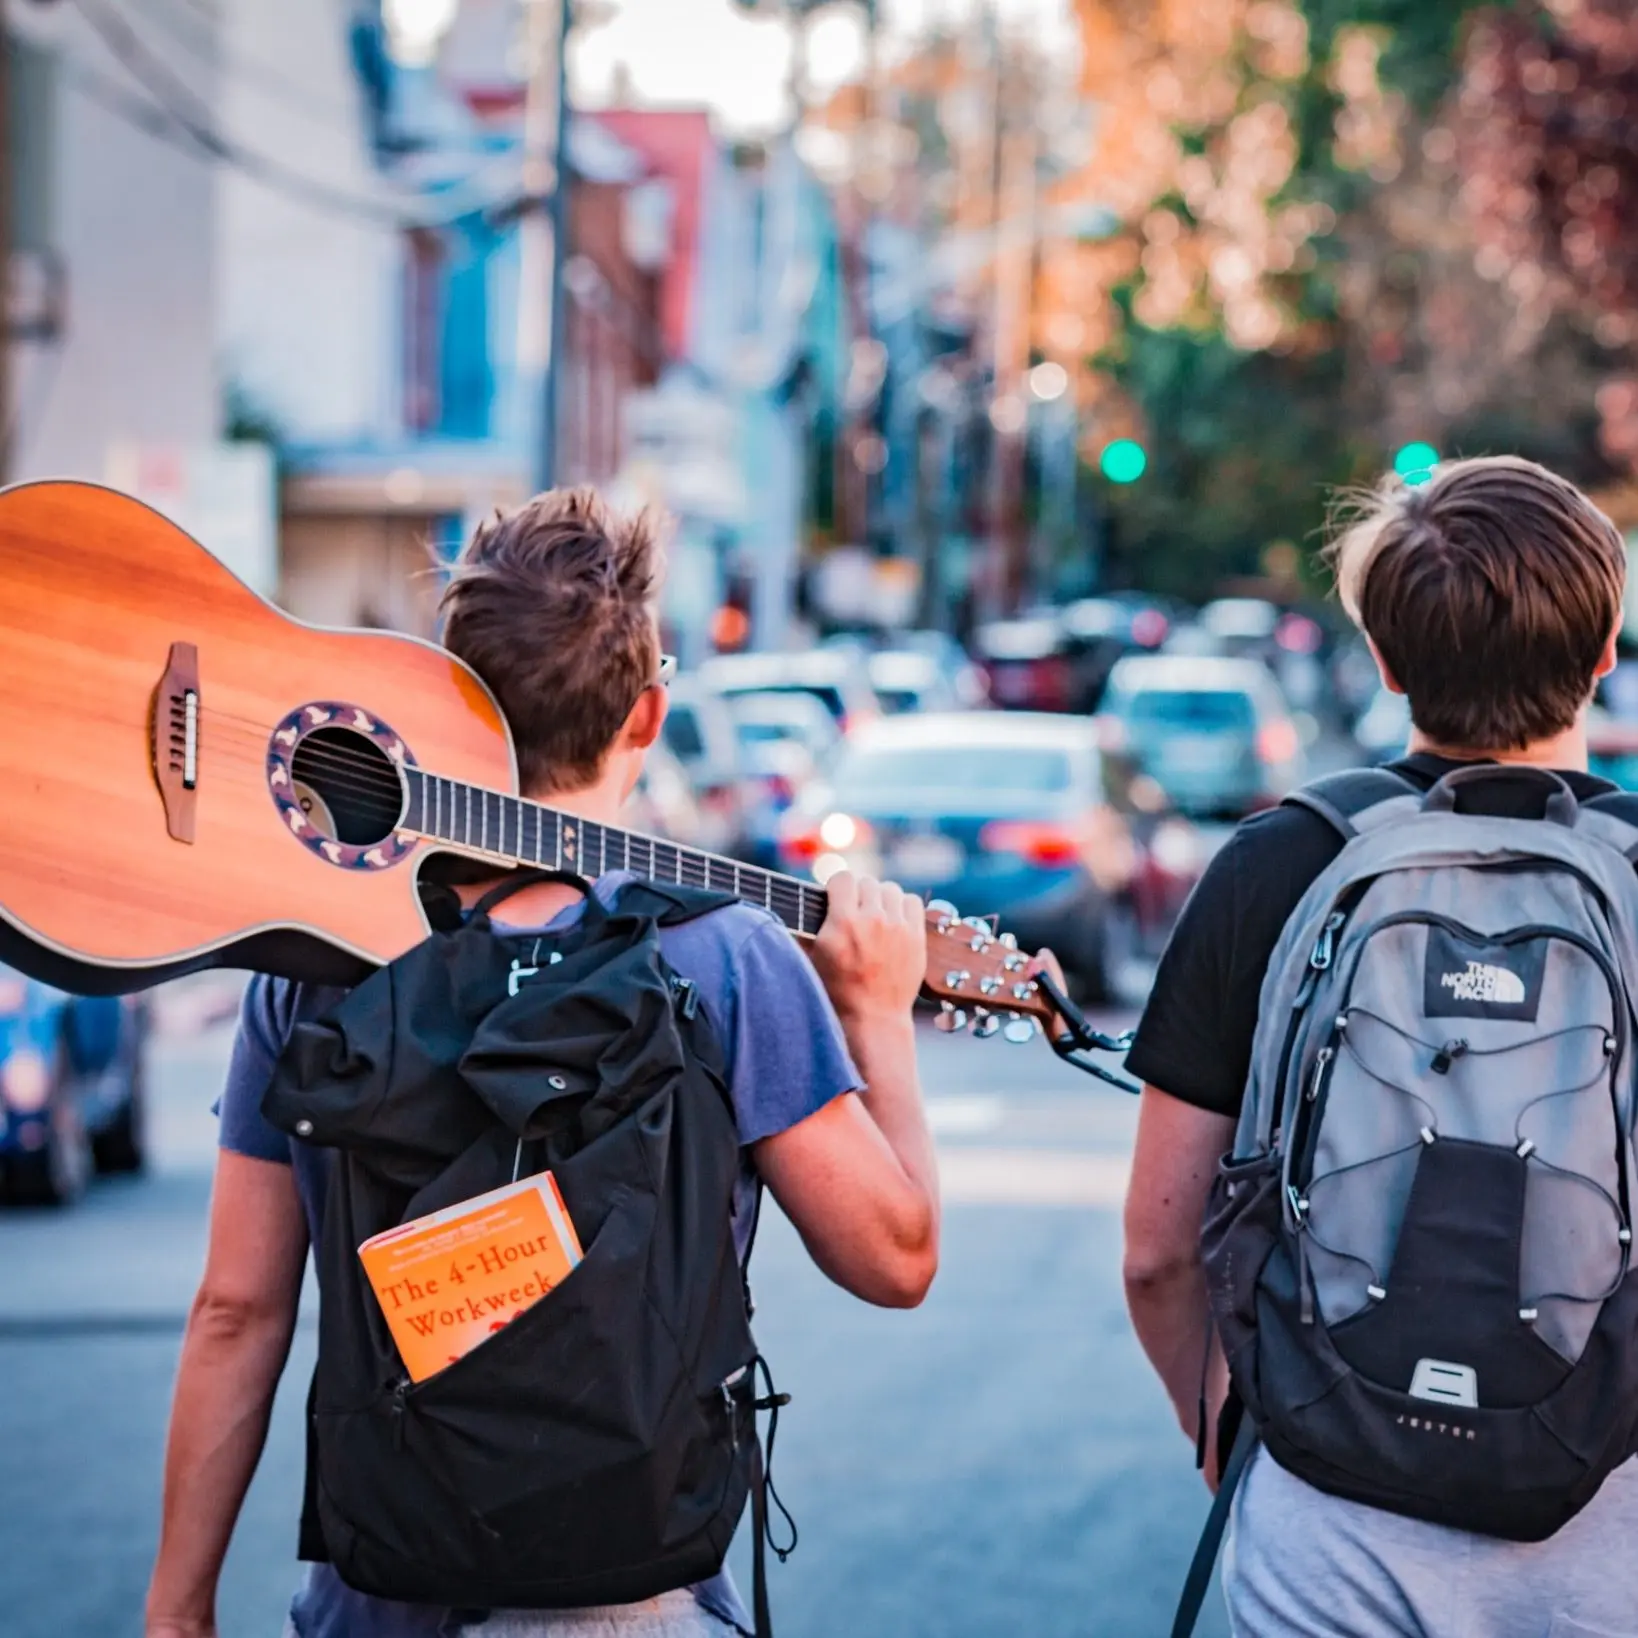 two men walking down the street with backpacks on. One has a guitar over his shoulder.